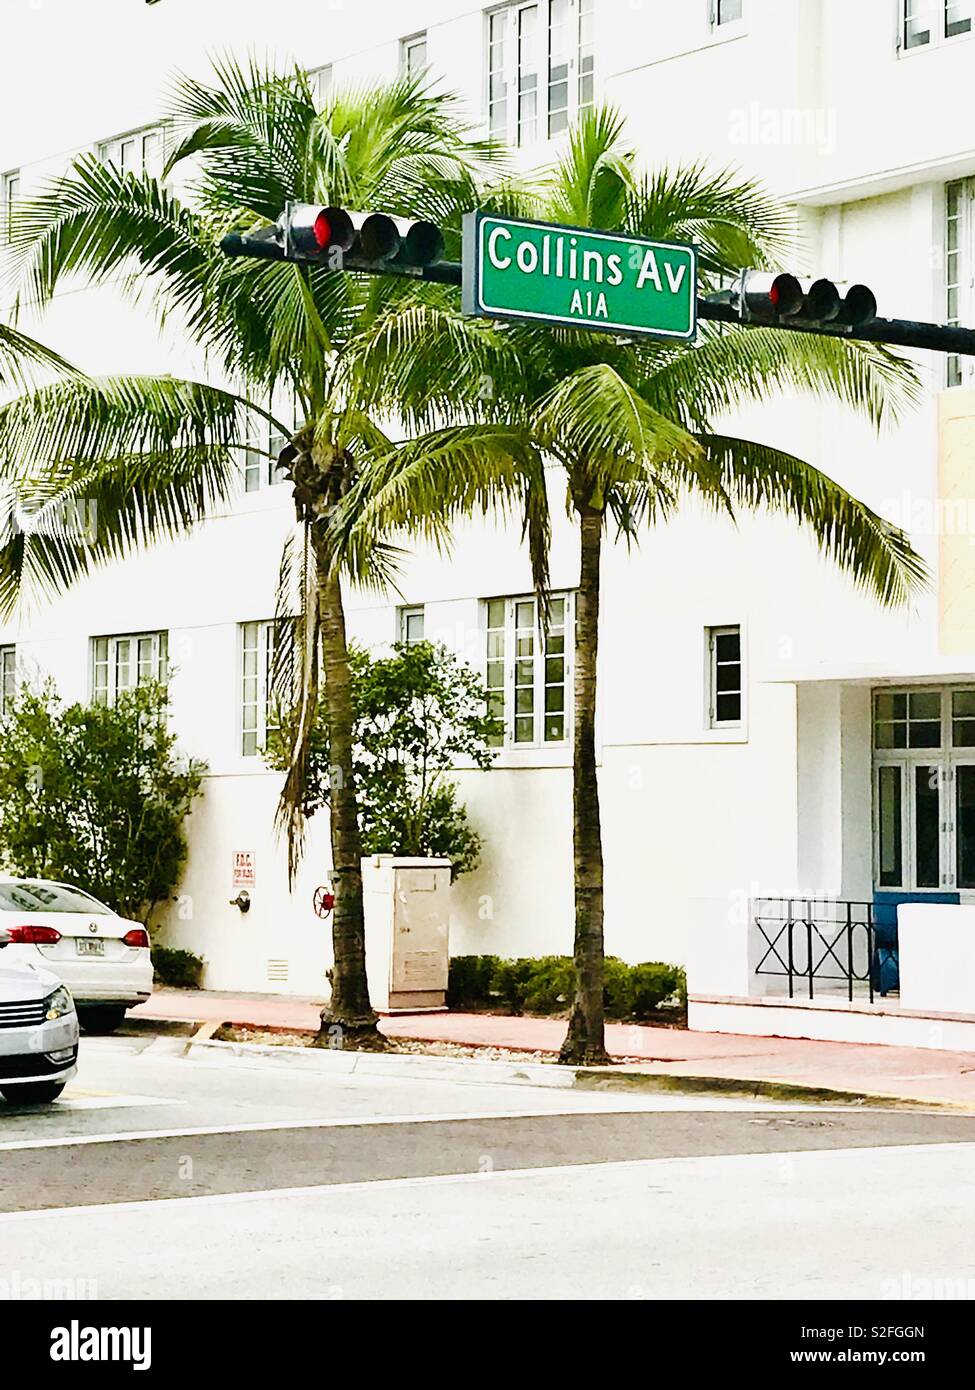 Collins Av Sign with palm trees in South Beach Miami Florida Stock Photo